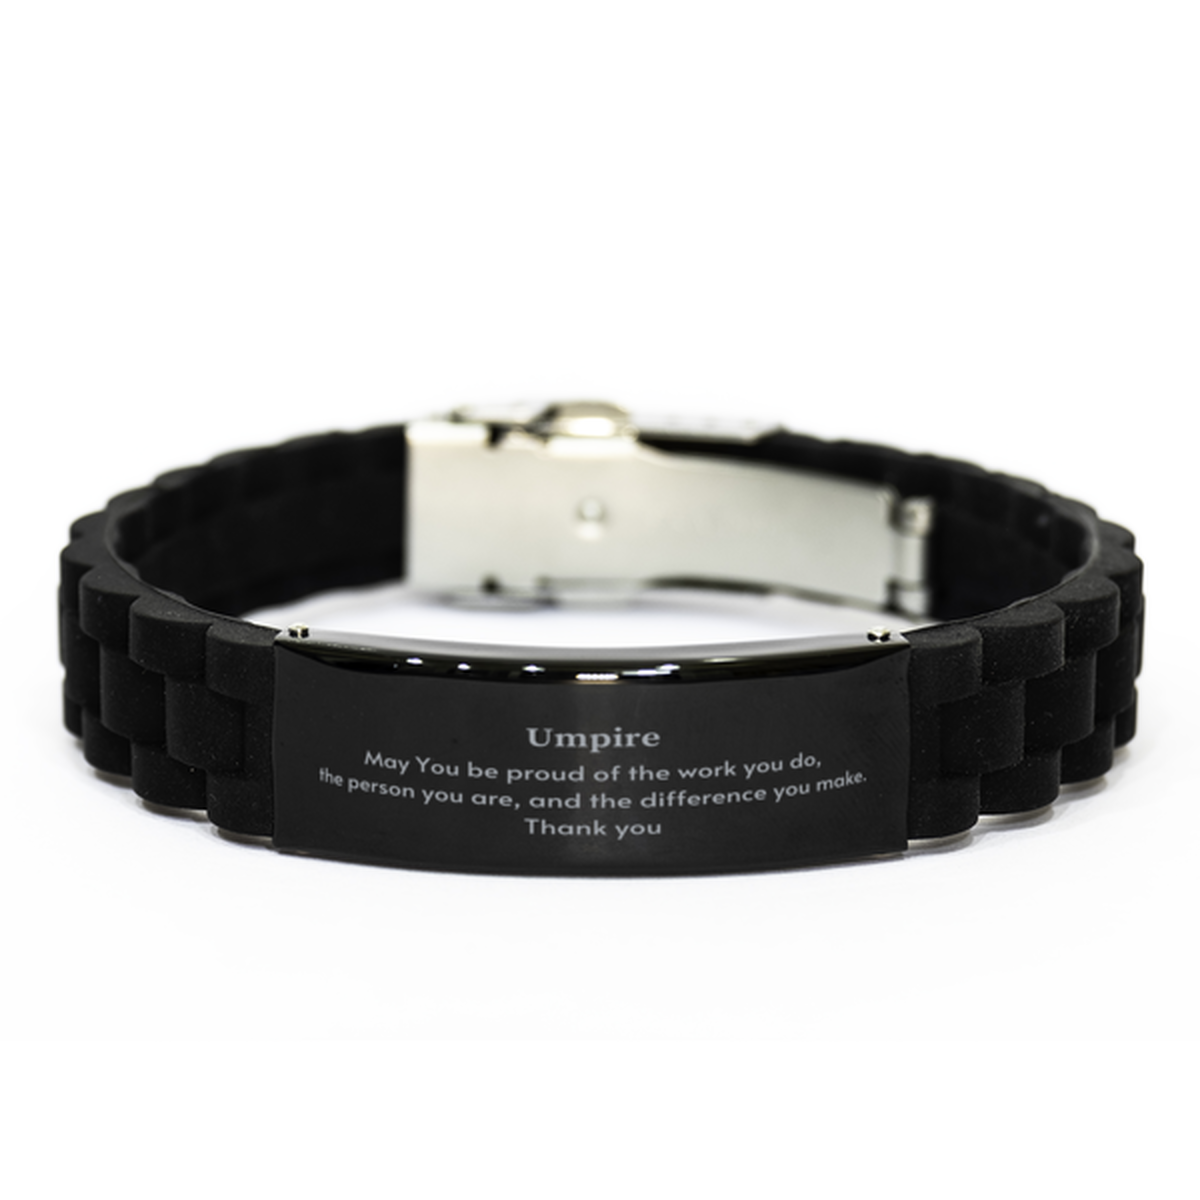 Heartwarming Black Glidelock Clasp Bracelet Retirement Coworkers Gifts for Umpire, Umpire May You be proud of the work you do, the person you are Gifts for Boss Men Women Friends